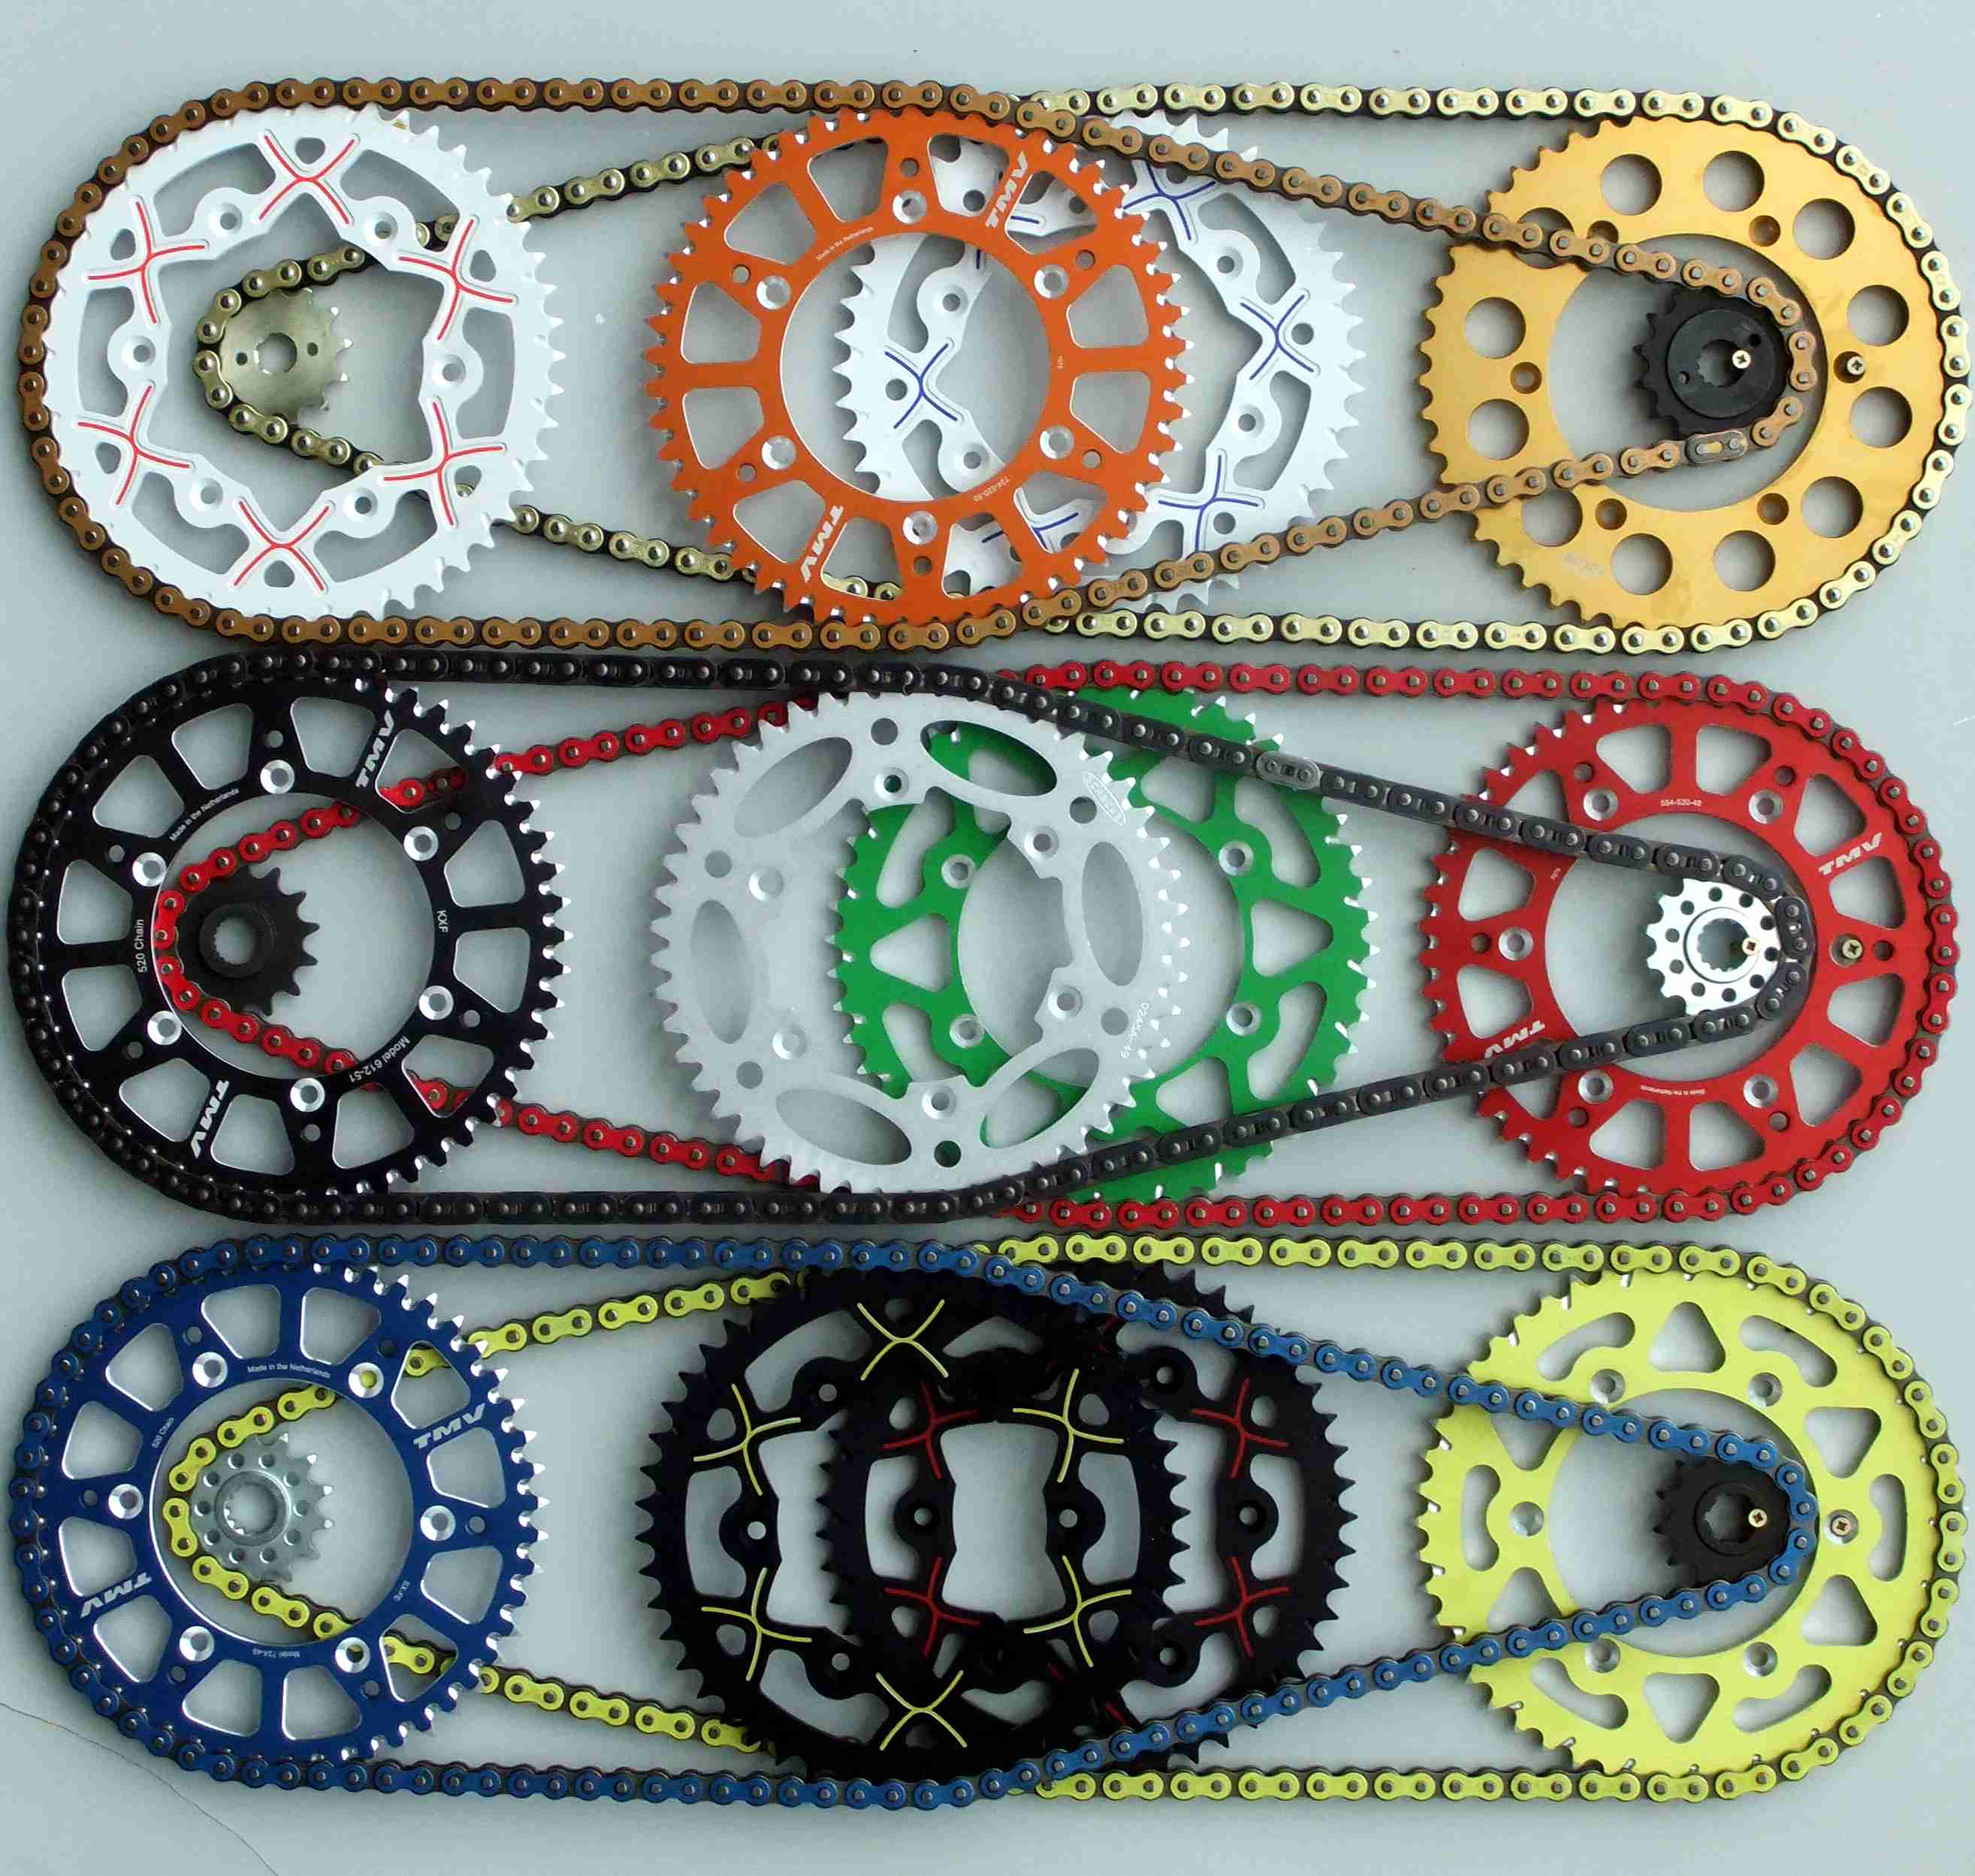 ON REQUEST OFFROAD CHAIN SET WITH THE DOSE FOR KIT SILVER / BLACK / OR COLOURED ON KTM ALL LC-4 350-660/ DUKE/ SM 690 MODELLE 1993-